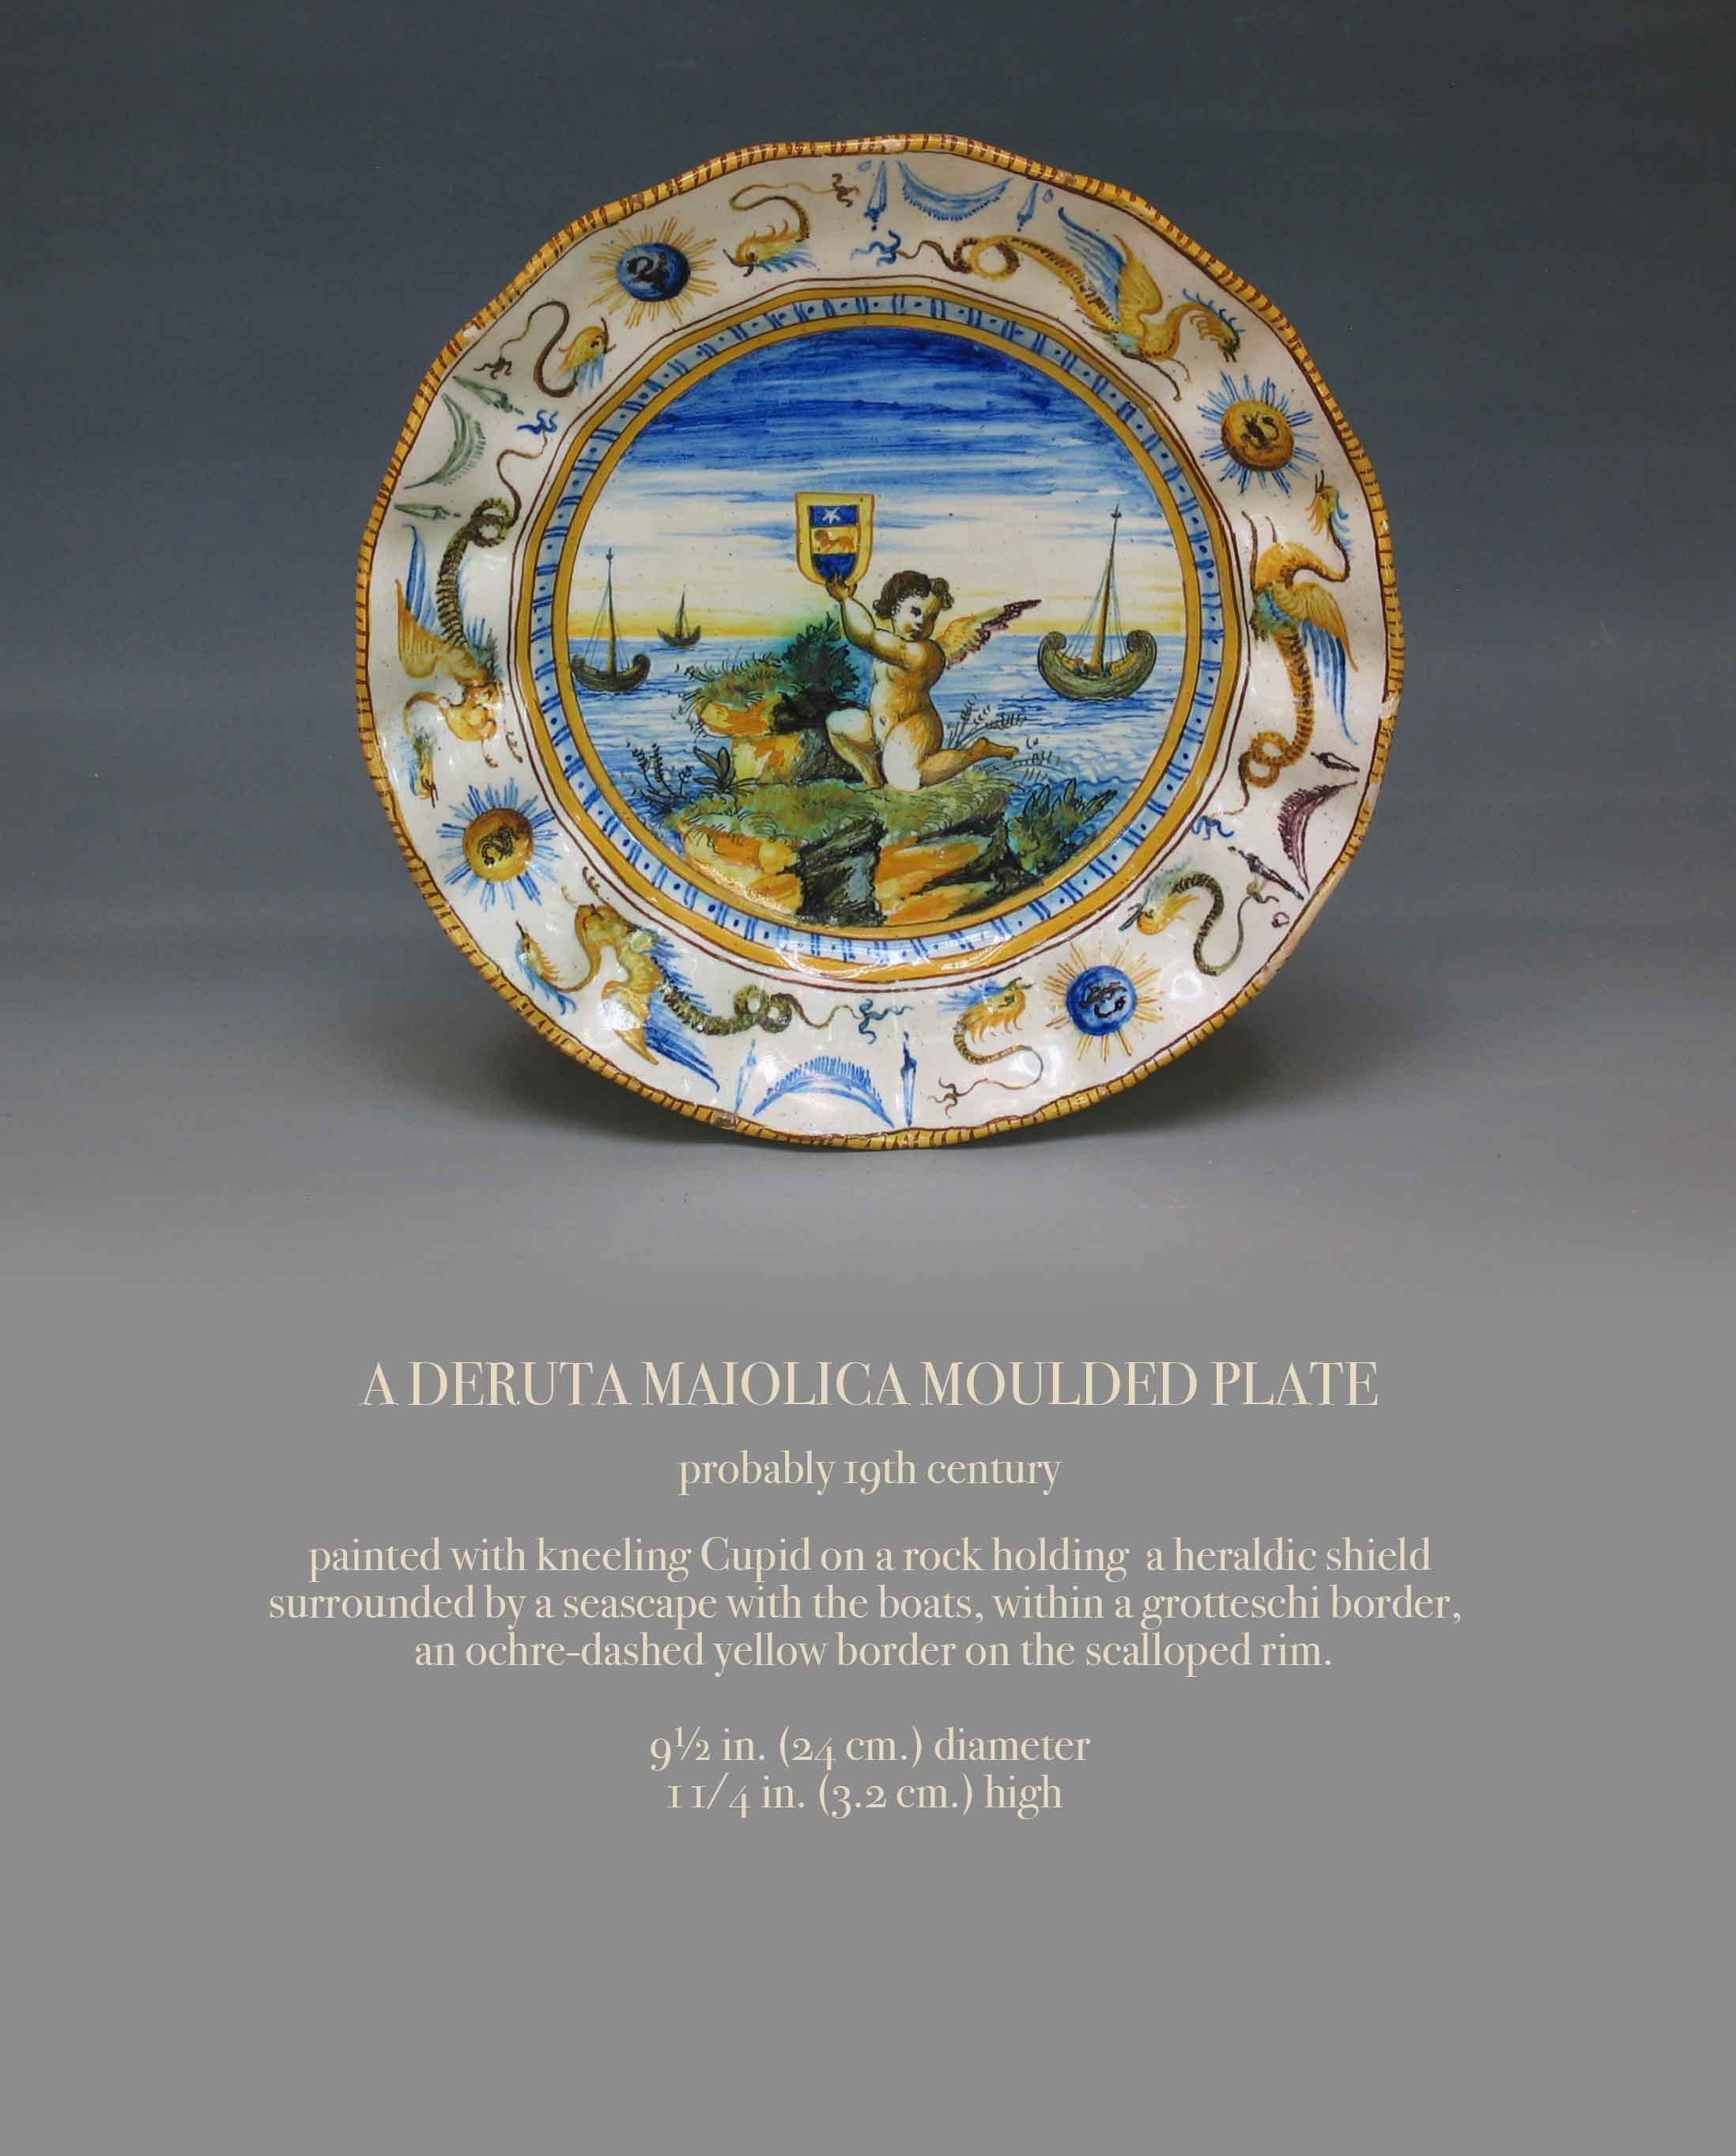 A DERUTA MAIOLICA MOULDED PLATE

Probably 19th Century.

Painted with kneeling Cupid on a rock holding  a heraldic shield surrounded by a seascape with the boats, within a grotteschi border, an ochre-dashed yellow border on the scalloped rim.

9½